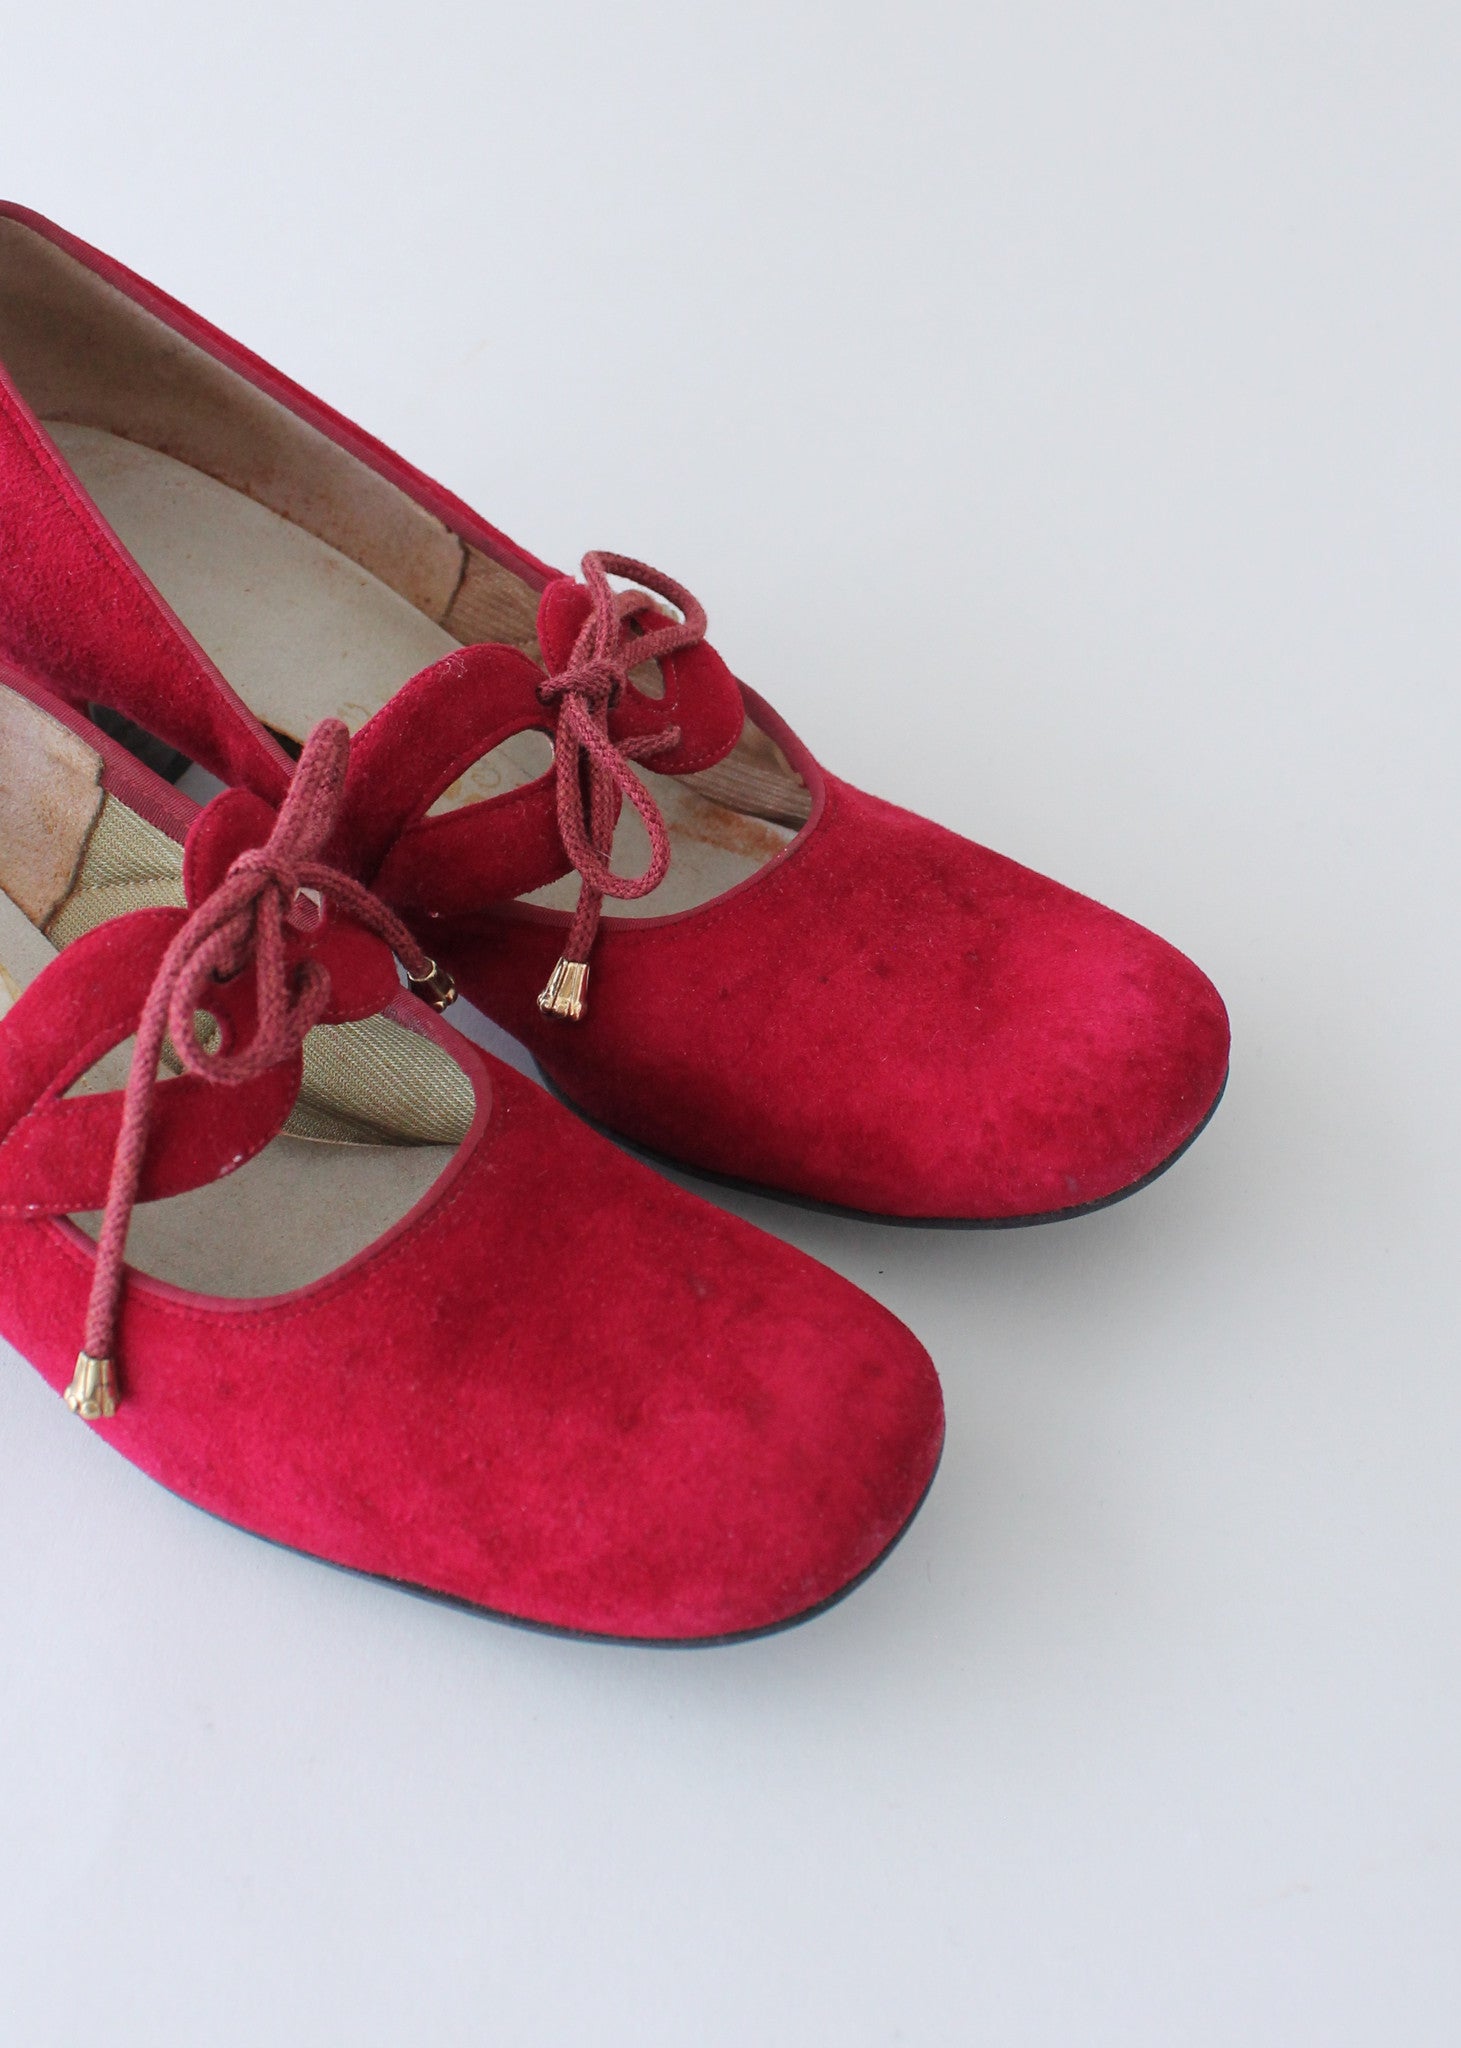 Vintage 1960s MOD Red Mary Janes Shoes - Raleigh Vintage